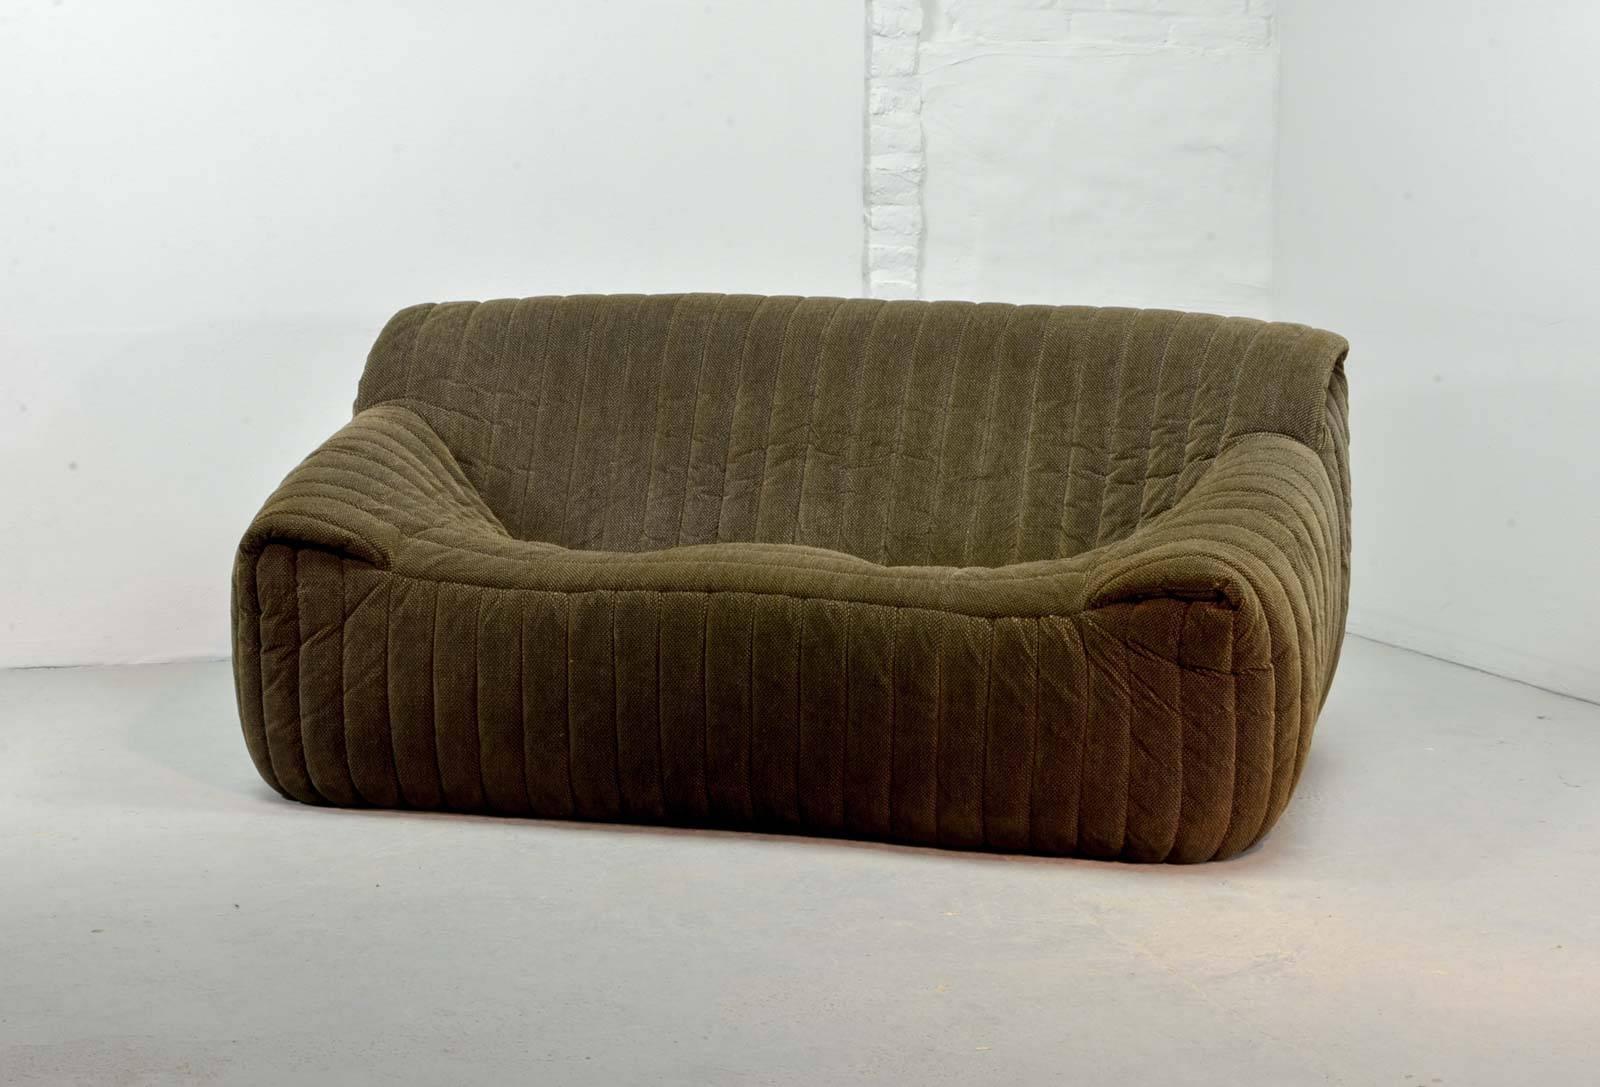 This very comfortable lounge two-seat sofa, model 'Sandra' was designed by Annie Hieronimus for Cinna in 1977 in France. The foam, seating comfort and the original dark brown with white mixed quality fabric upholstery of this sofa still remains in